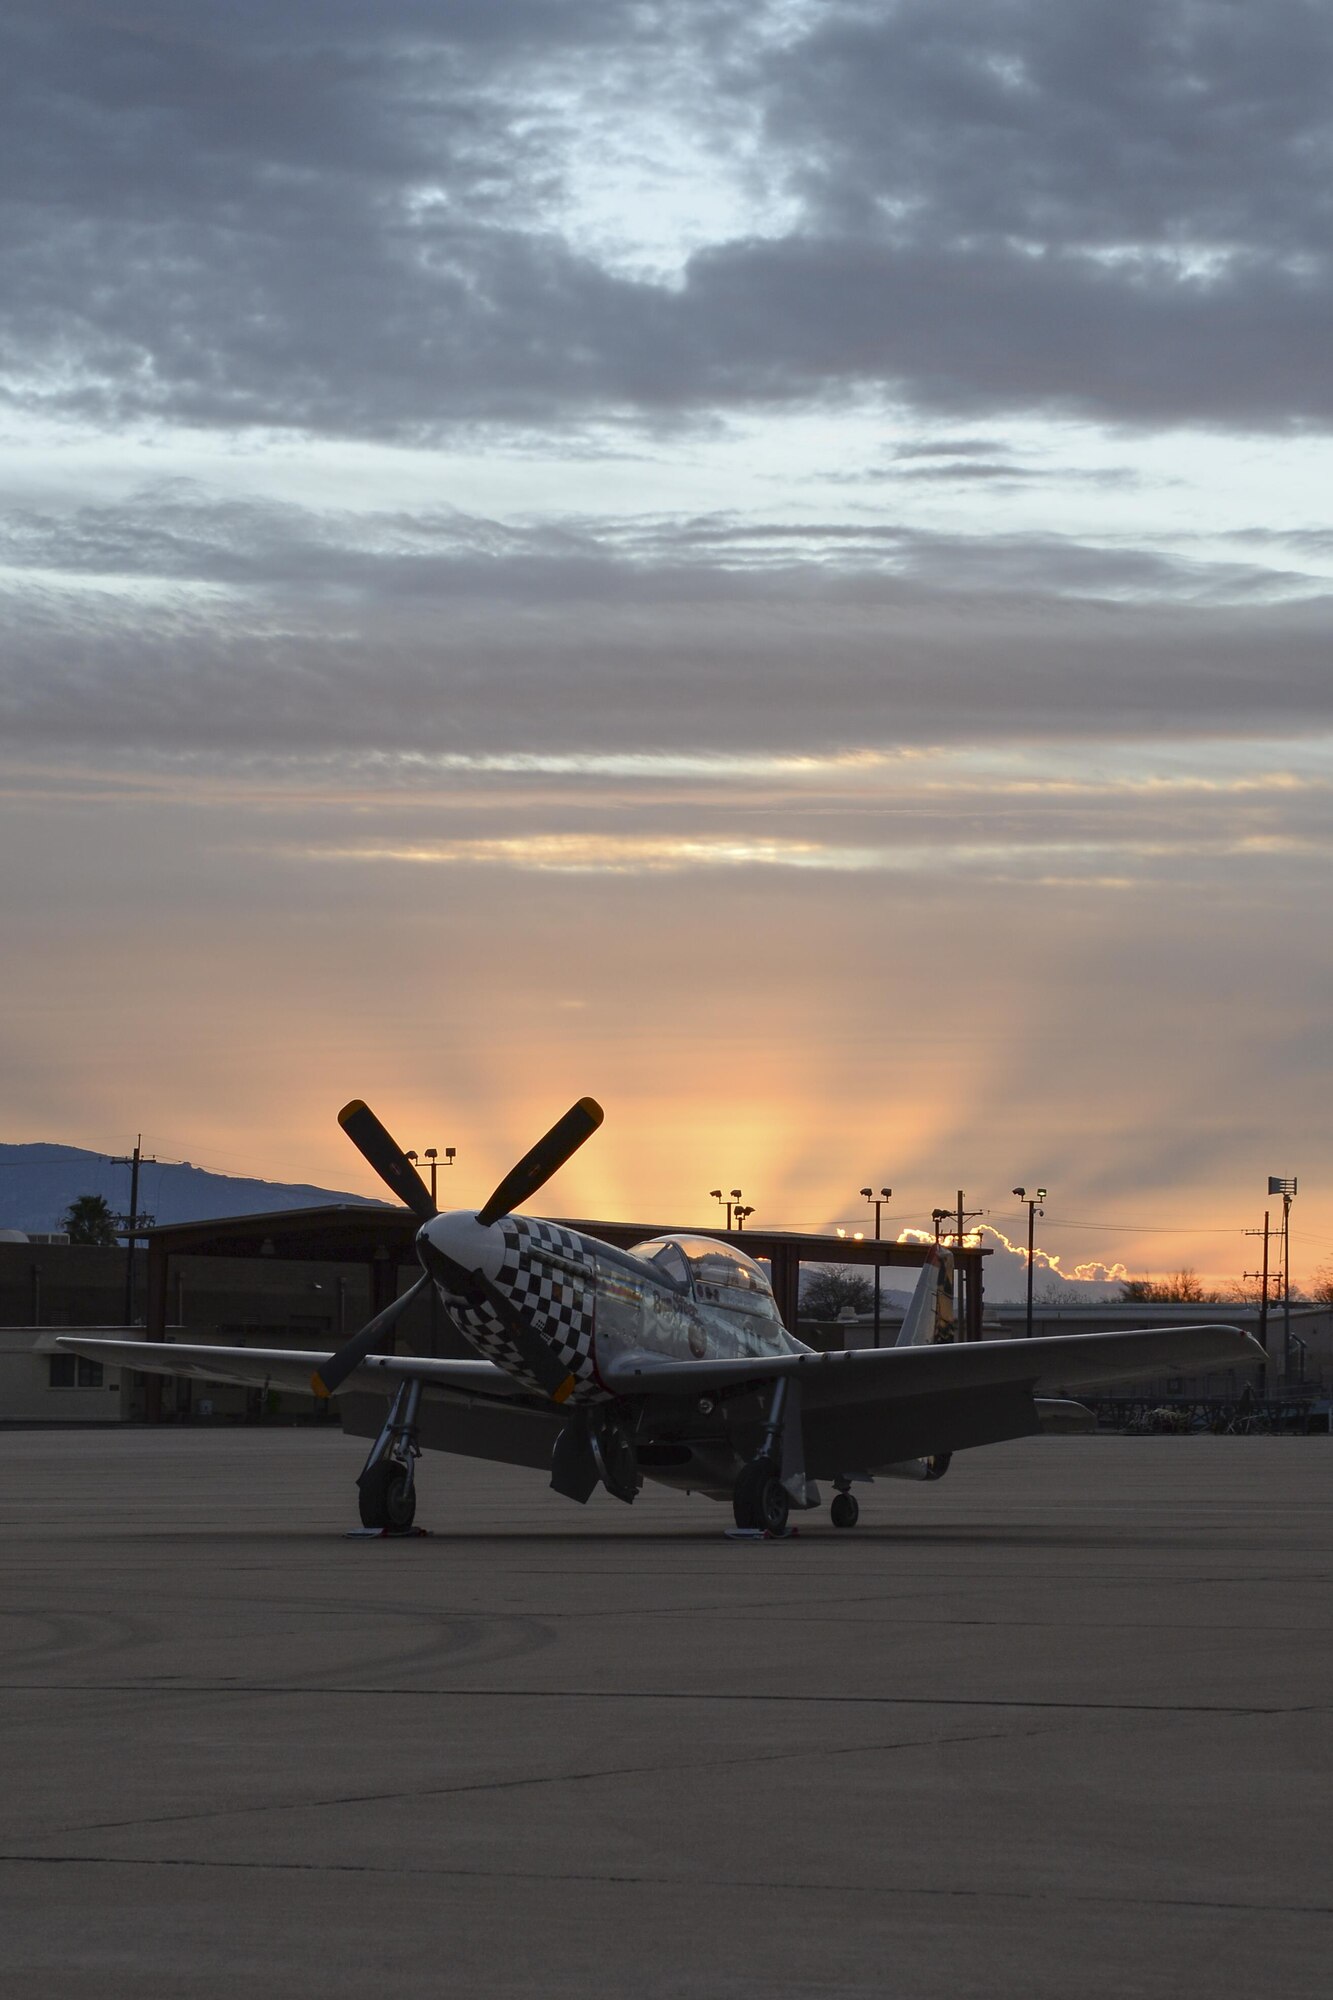 A TF-51 Mustang rests on the flightline during the 2017 Heritage Flight Training and Certification Course at Davis-Monthan Air Force Base, Ariz., Feb. 12, 2017. The annual aerial demonstration training event has been held at D-M since 2001. (U.S. Air Force photo by Senior Airman Ashley N. Steffen)